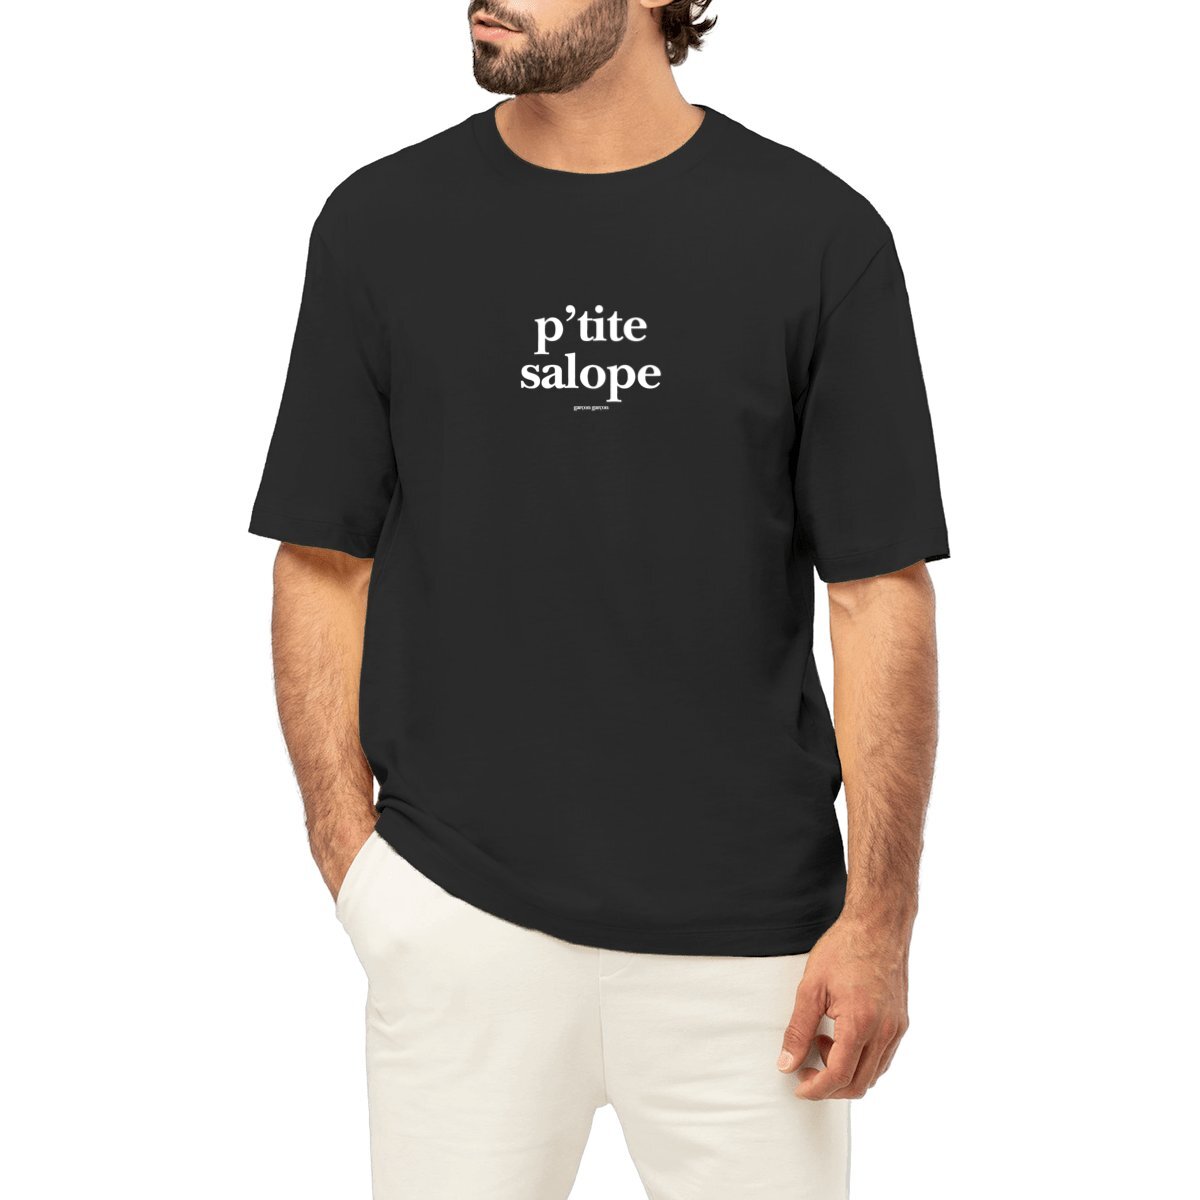 p'tite salope tee oversized. garçon garçon tee oversize BLACK. Dive into the essence of Parisian cool with this oversized tee. The subtle 'garçon garçon' signature whispers a chic narrative, offering a slice of the city's famed elegance. Perfect for those who speak style with simplicity.